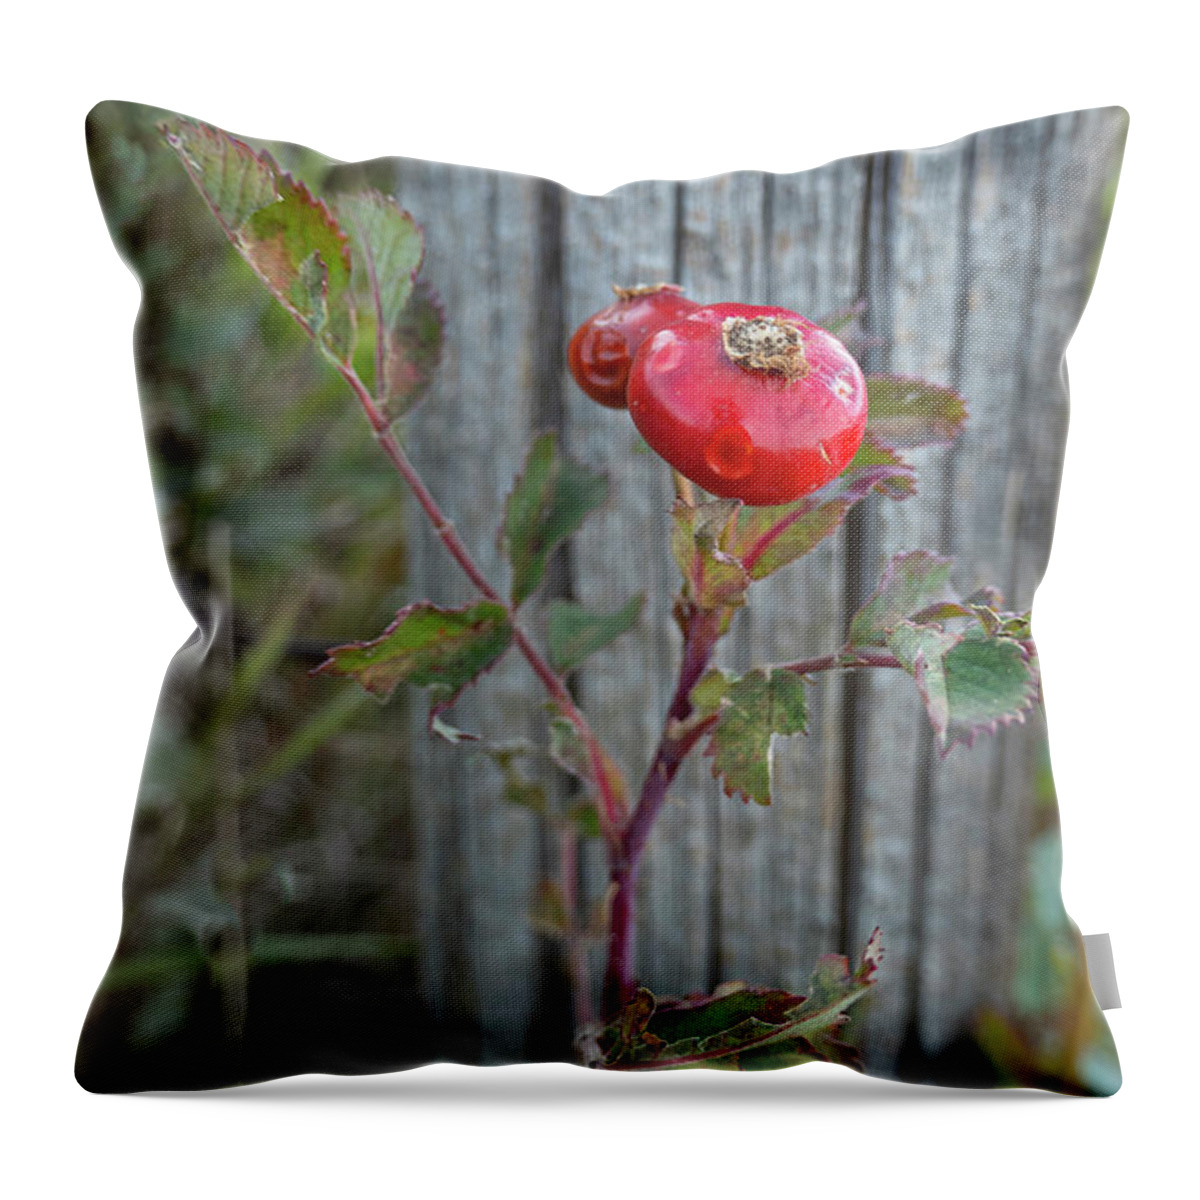 Rose Throw Pillow featuring the photograph Wild Rose Hips And Fence Post by Karen Rispin